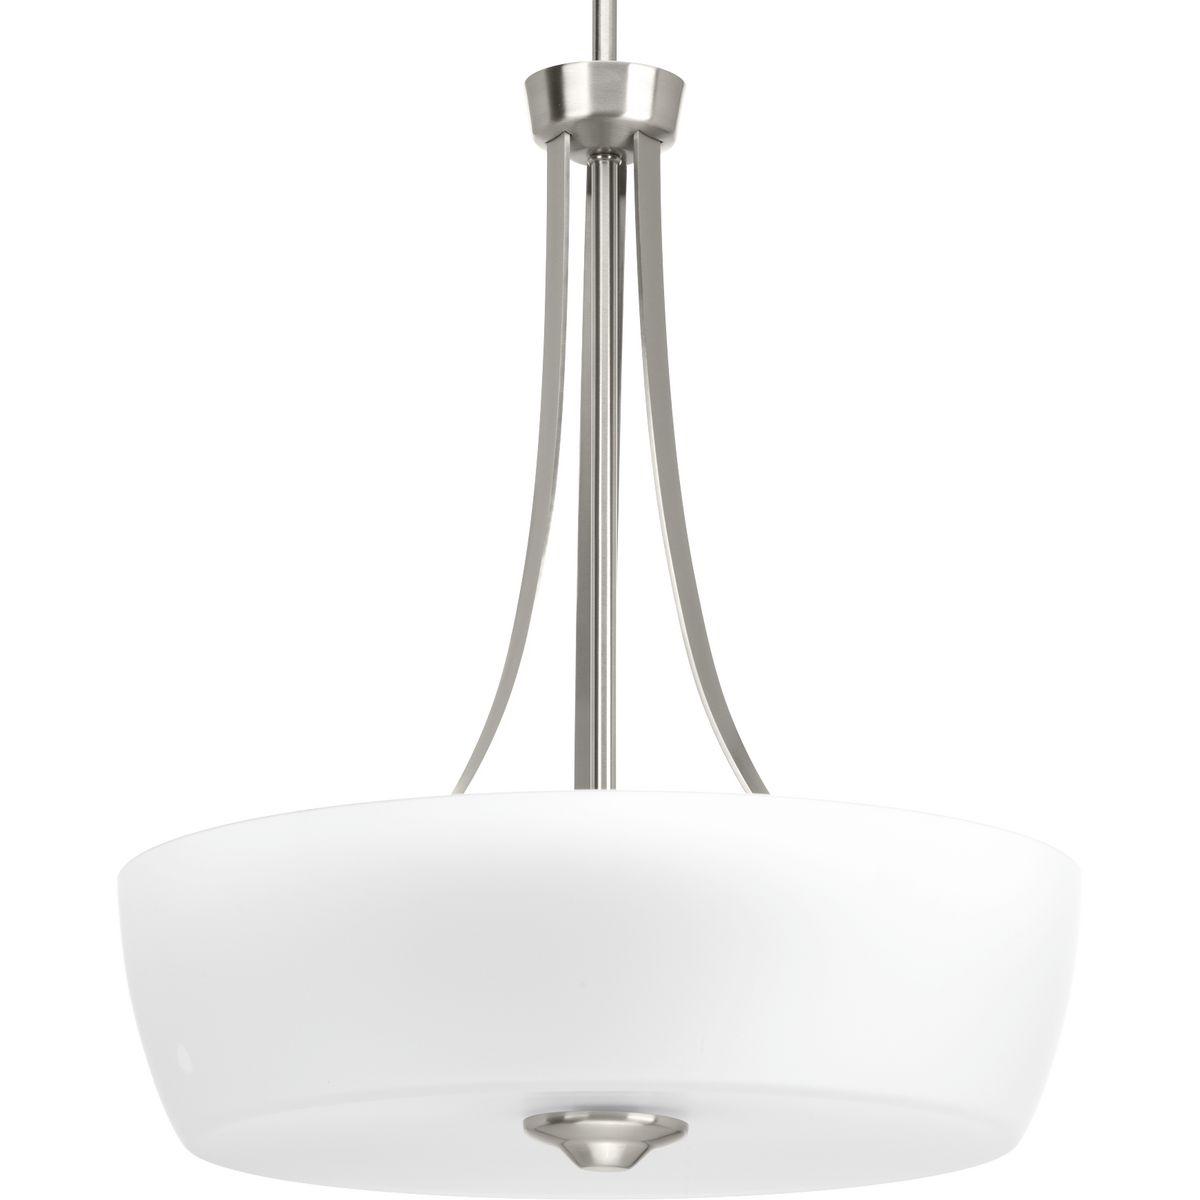 Hubbell P500030-009 The Leap collection features sweeping arcs that frame tapered etched shades. Glass shades are slightly larger in scale to complement contemporary design trends. The three-light foyer pendant is finished in Brushed Nickel.  ; Brushed Nickel finish. ; Sweep